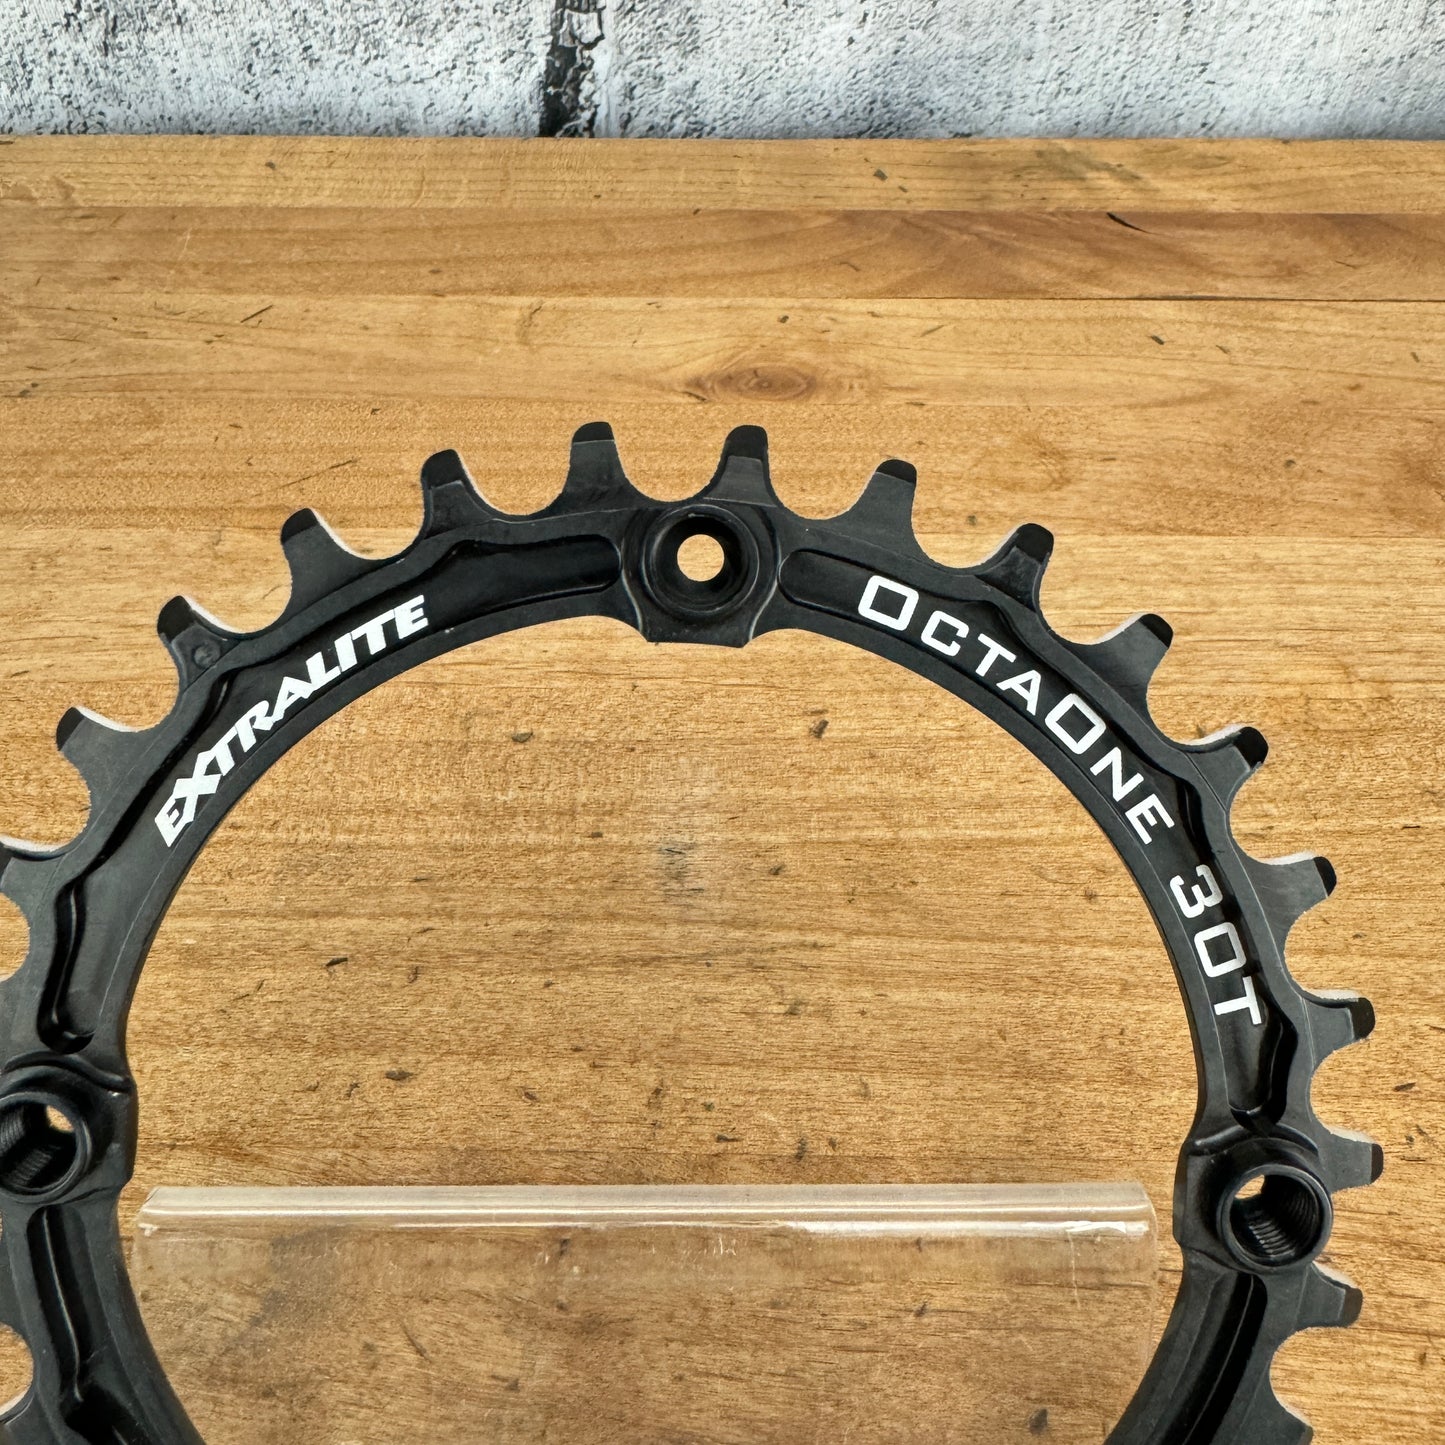 New! Extralite OctaOne 30t Narrow Wide 4-Bolt 104BCD Single Chainring 28g